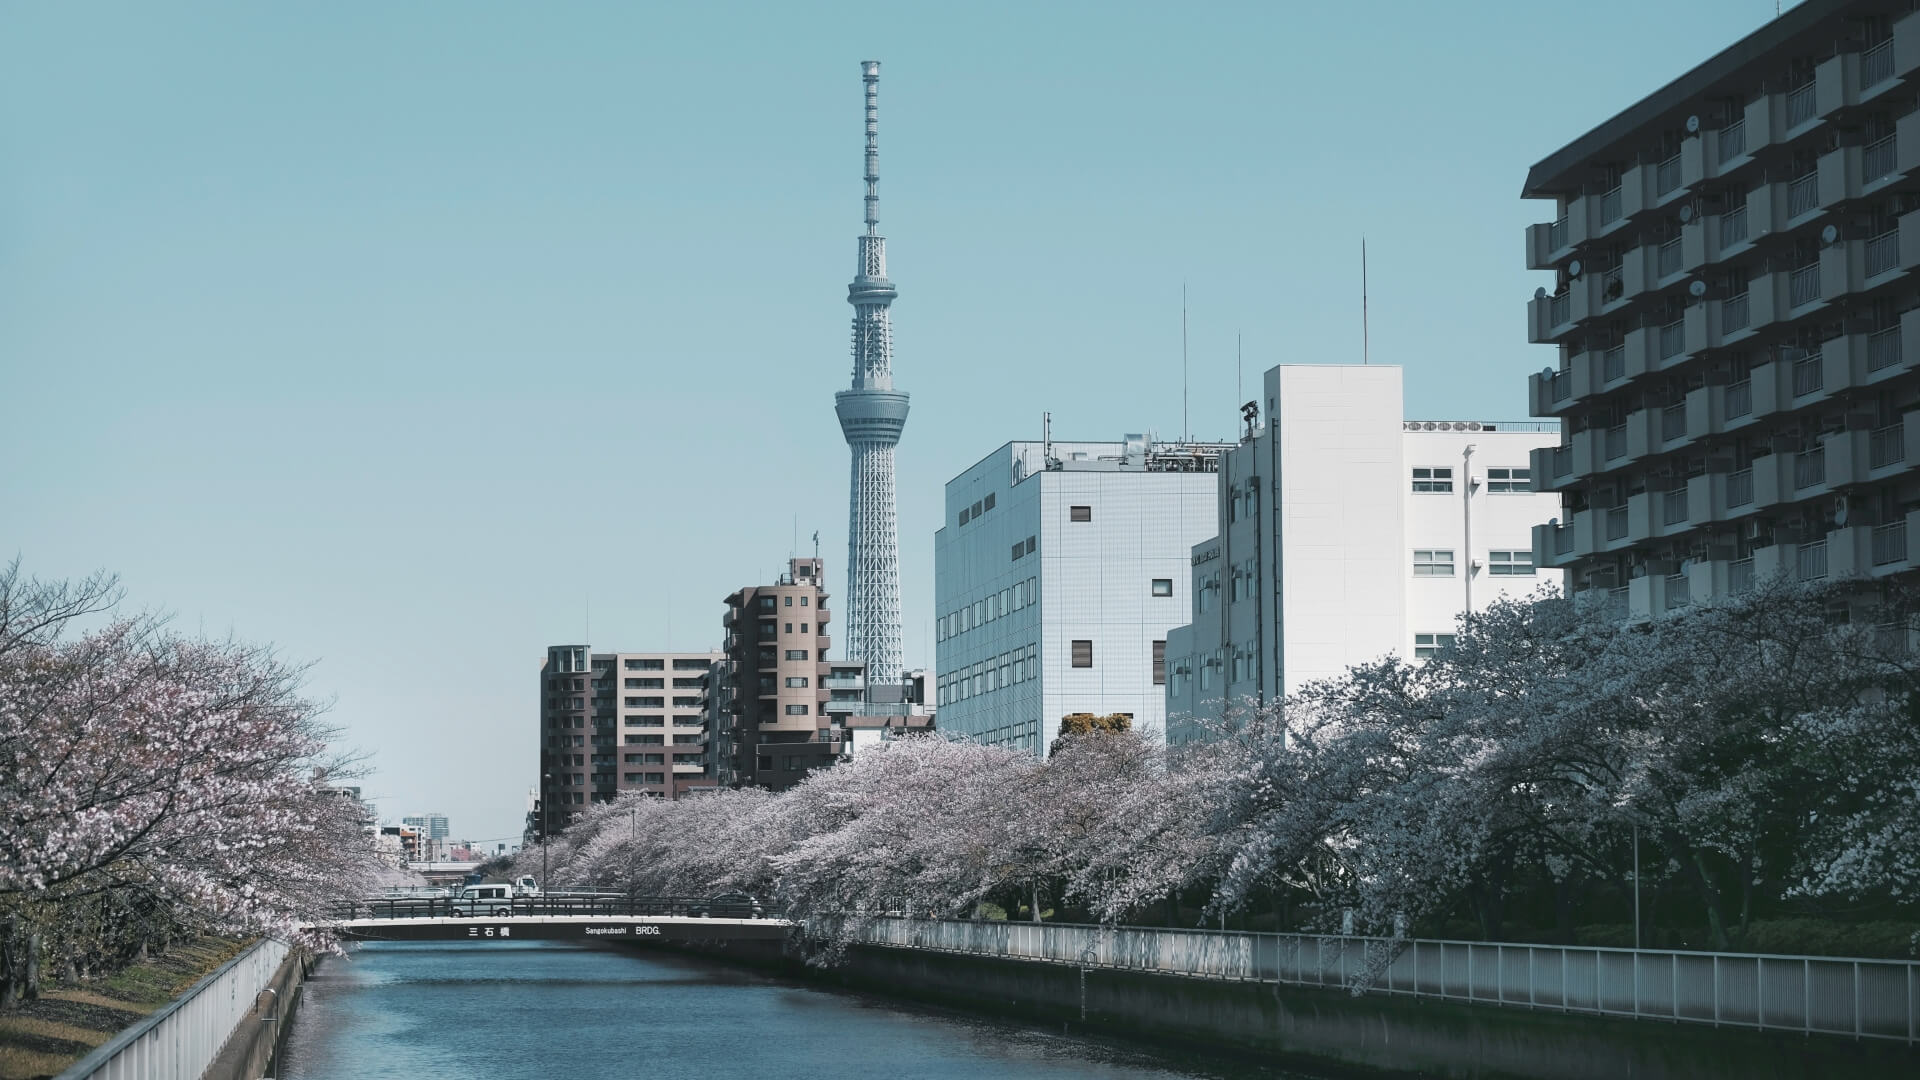 Tokyo Skytree: The Tallest Building In Japan - view of the tower from afar